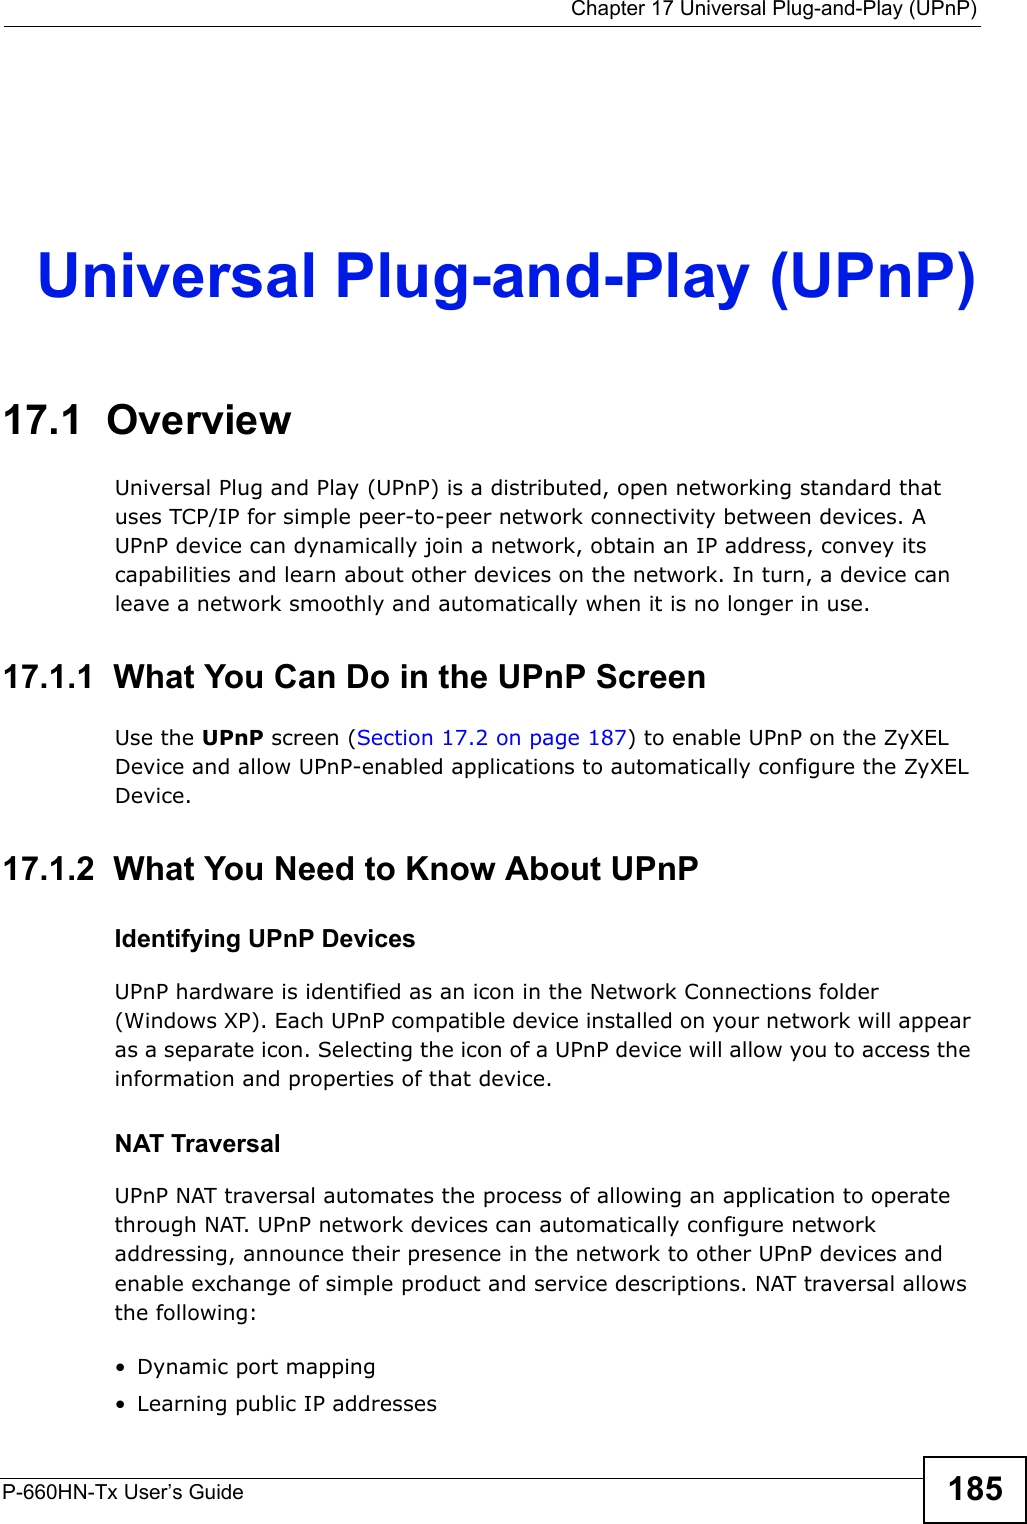  Chapter 17 Universal Plug-and-Play (UPnP)P-660HN-Tx User’s Guide 185CHAPTER  17 Universal Plug-and-Play (UPnP)17.1  OverviewUniversal Plug and Play (UPnP) is a distributed, open networking standard that uses TCP/IP for simple peer-to-peer network connectivity between devices. A UPnP device can dynamically join a network, obtain an IP address, convey its capabilities and learn about other devices on the network. In turn, a device can leave a network smoothly and automatically when it is no longer in use.17.1.1  What You Can Do in the UPnP ScreenUse the UPnP screen (Section 17.2 on page 187) to enable UPnP on the ZyXEL Device and allow UPnP-enabled applications to automatically configure the ZyXEL Device.17.1.2  What You Need to Know About UPnPIdentifying UPnP DevicesUPnP hardware is identified as an icon in the Network Connections folder (Windows XP). Each UPnP compatible device installed on your network will appear as a separate icon. Selecting the icon of a UPnP device will allow you to access the information and properties of that device. NAT TraversalUPnP NAT traversal automates the process of allowing an application to operate through NAT. UPnP network devices can automatically configure network addressing, announce their presence in the network to other UPnP devices and enable exchange of simple product and service descriptions. NAT traversal allows the following:• Dynamic port mapping• Learning public IP addresses